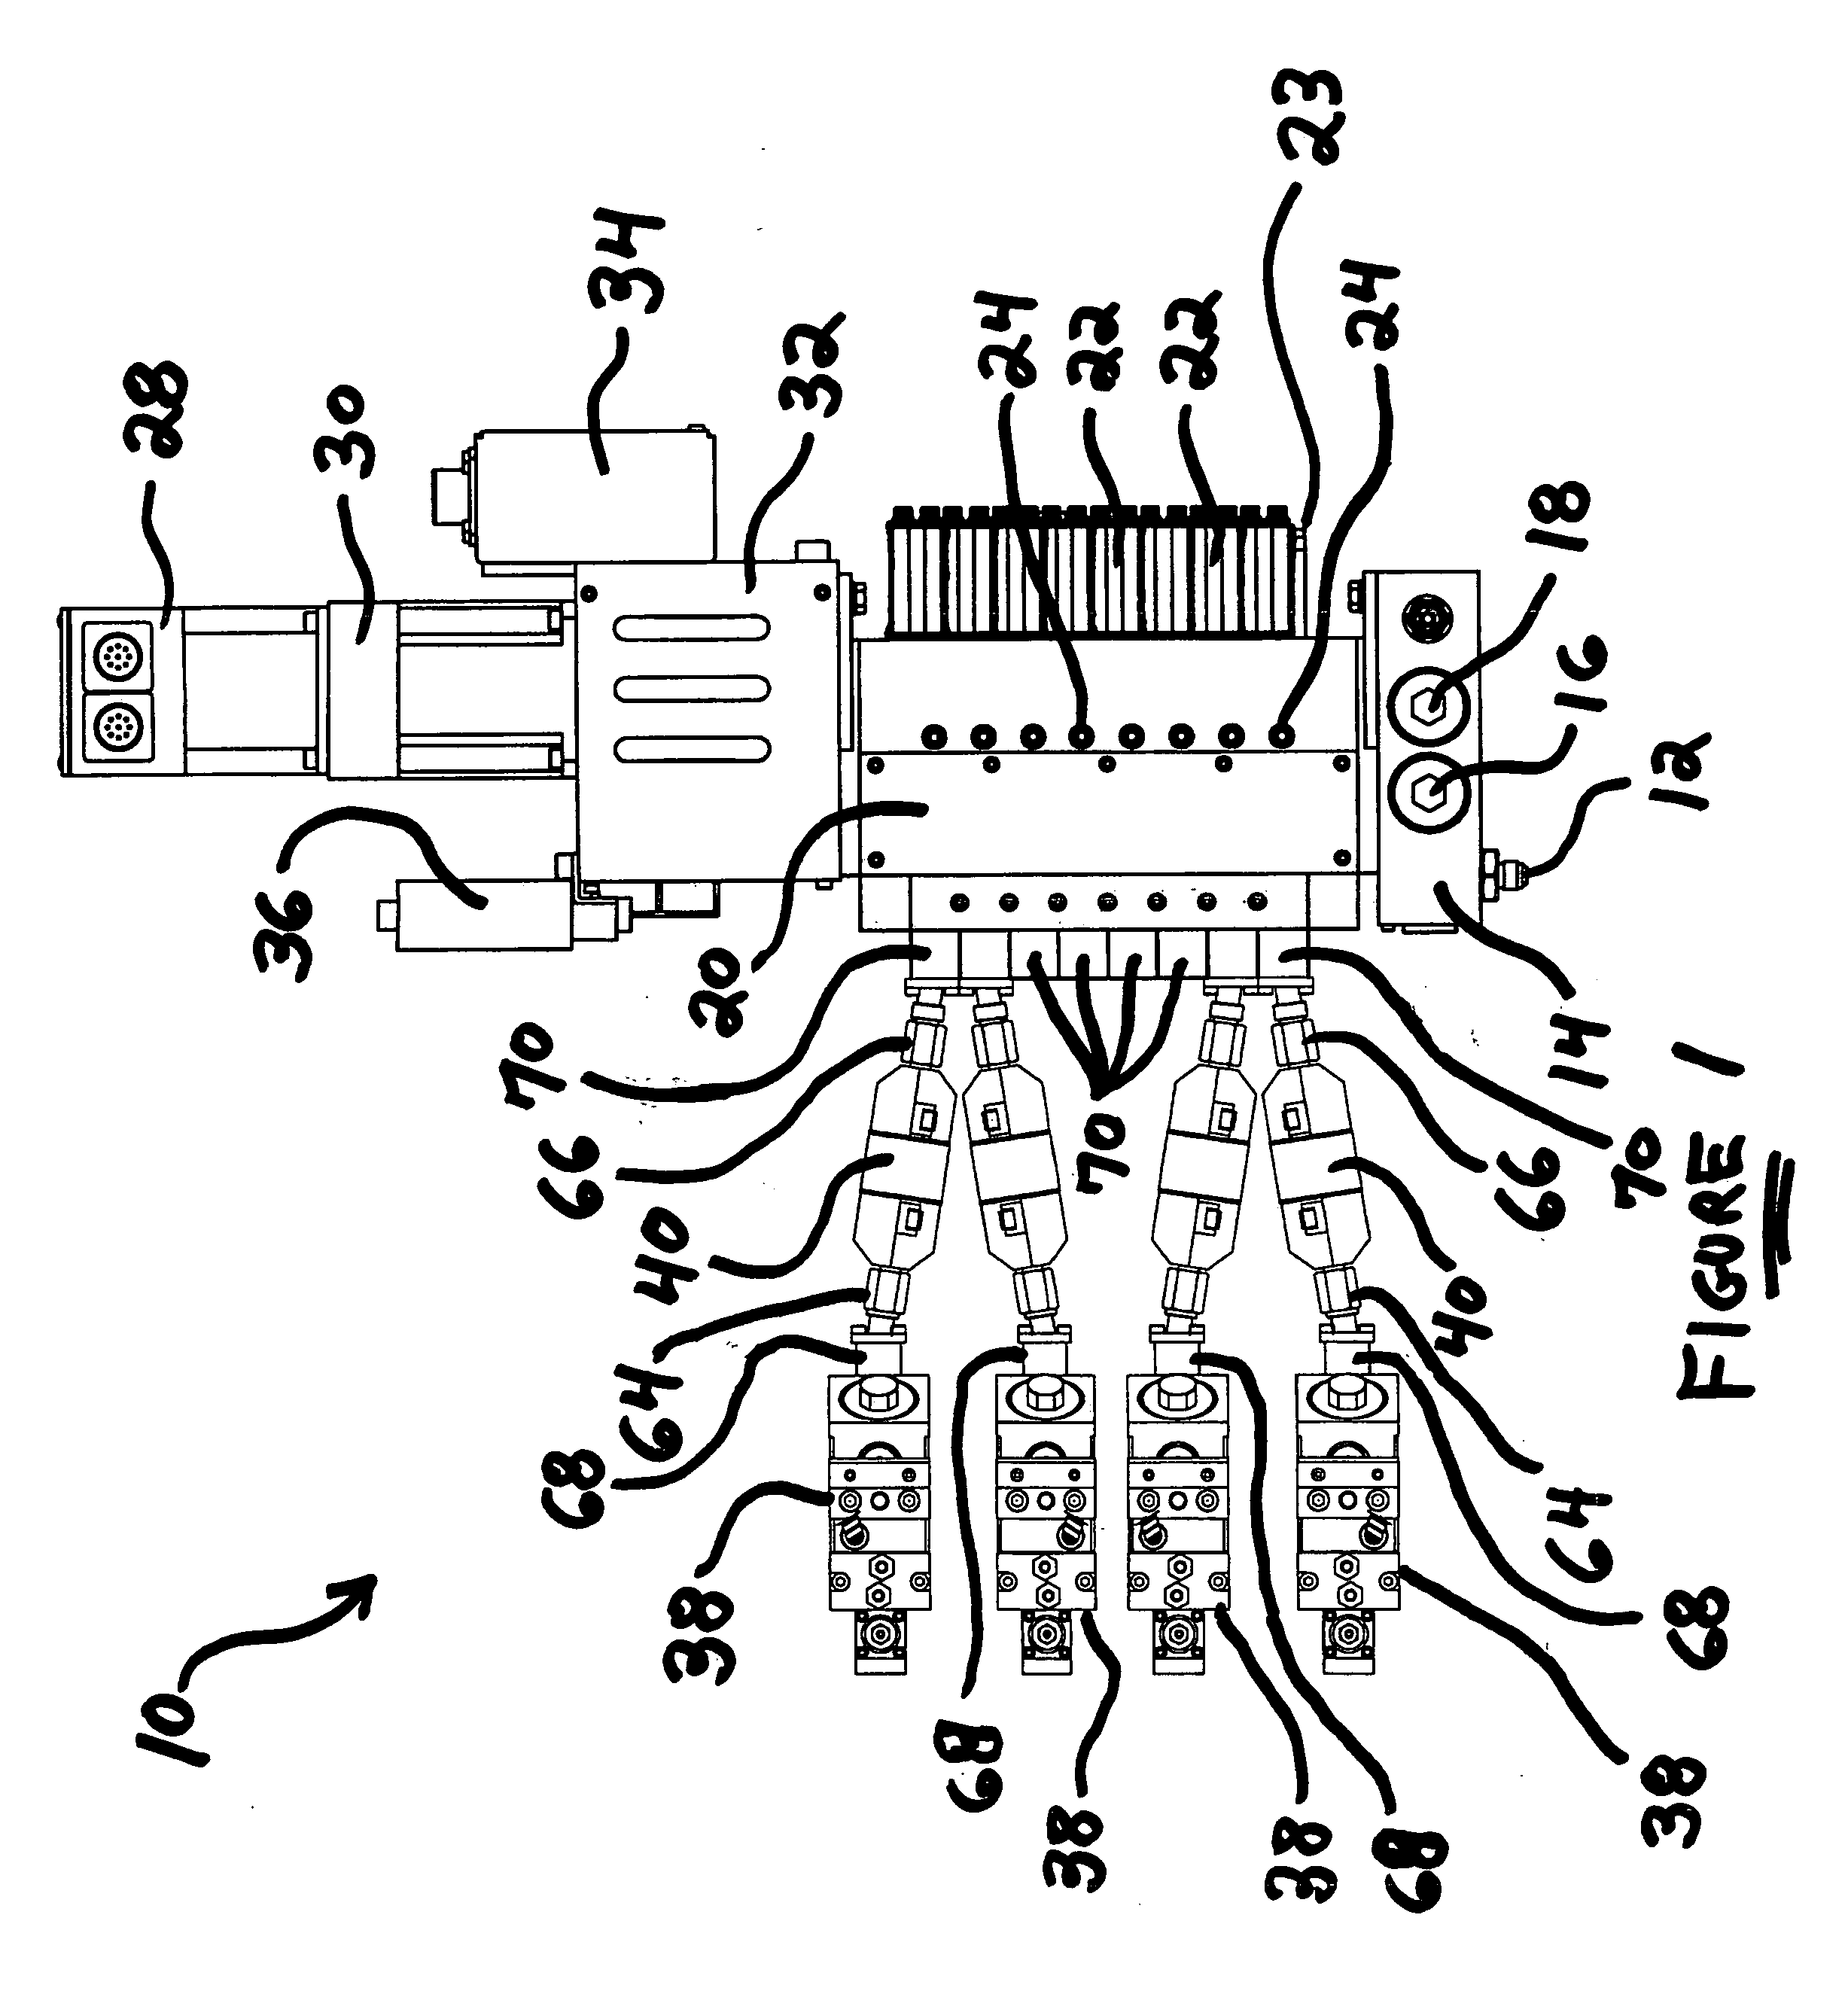 Remote metering station and applicator heads interconnected by means of relatively short hoses with universal connectors